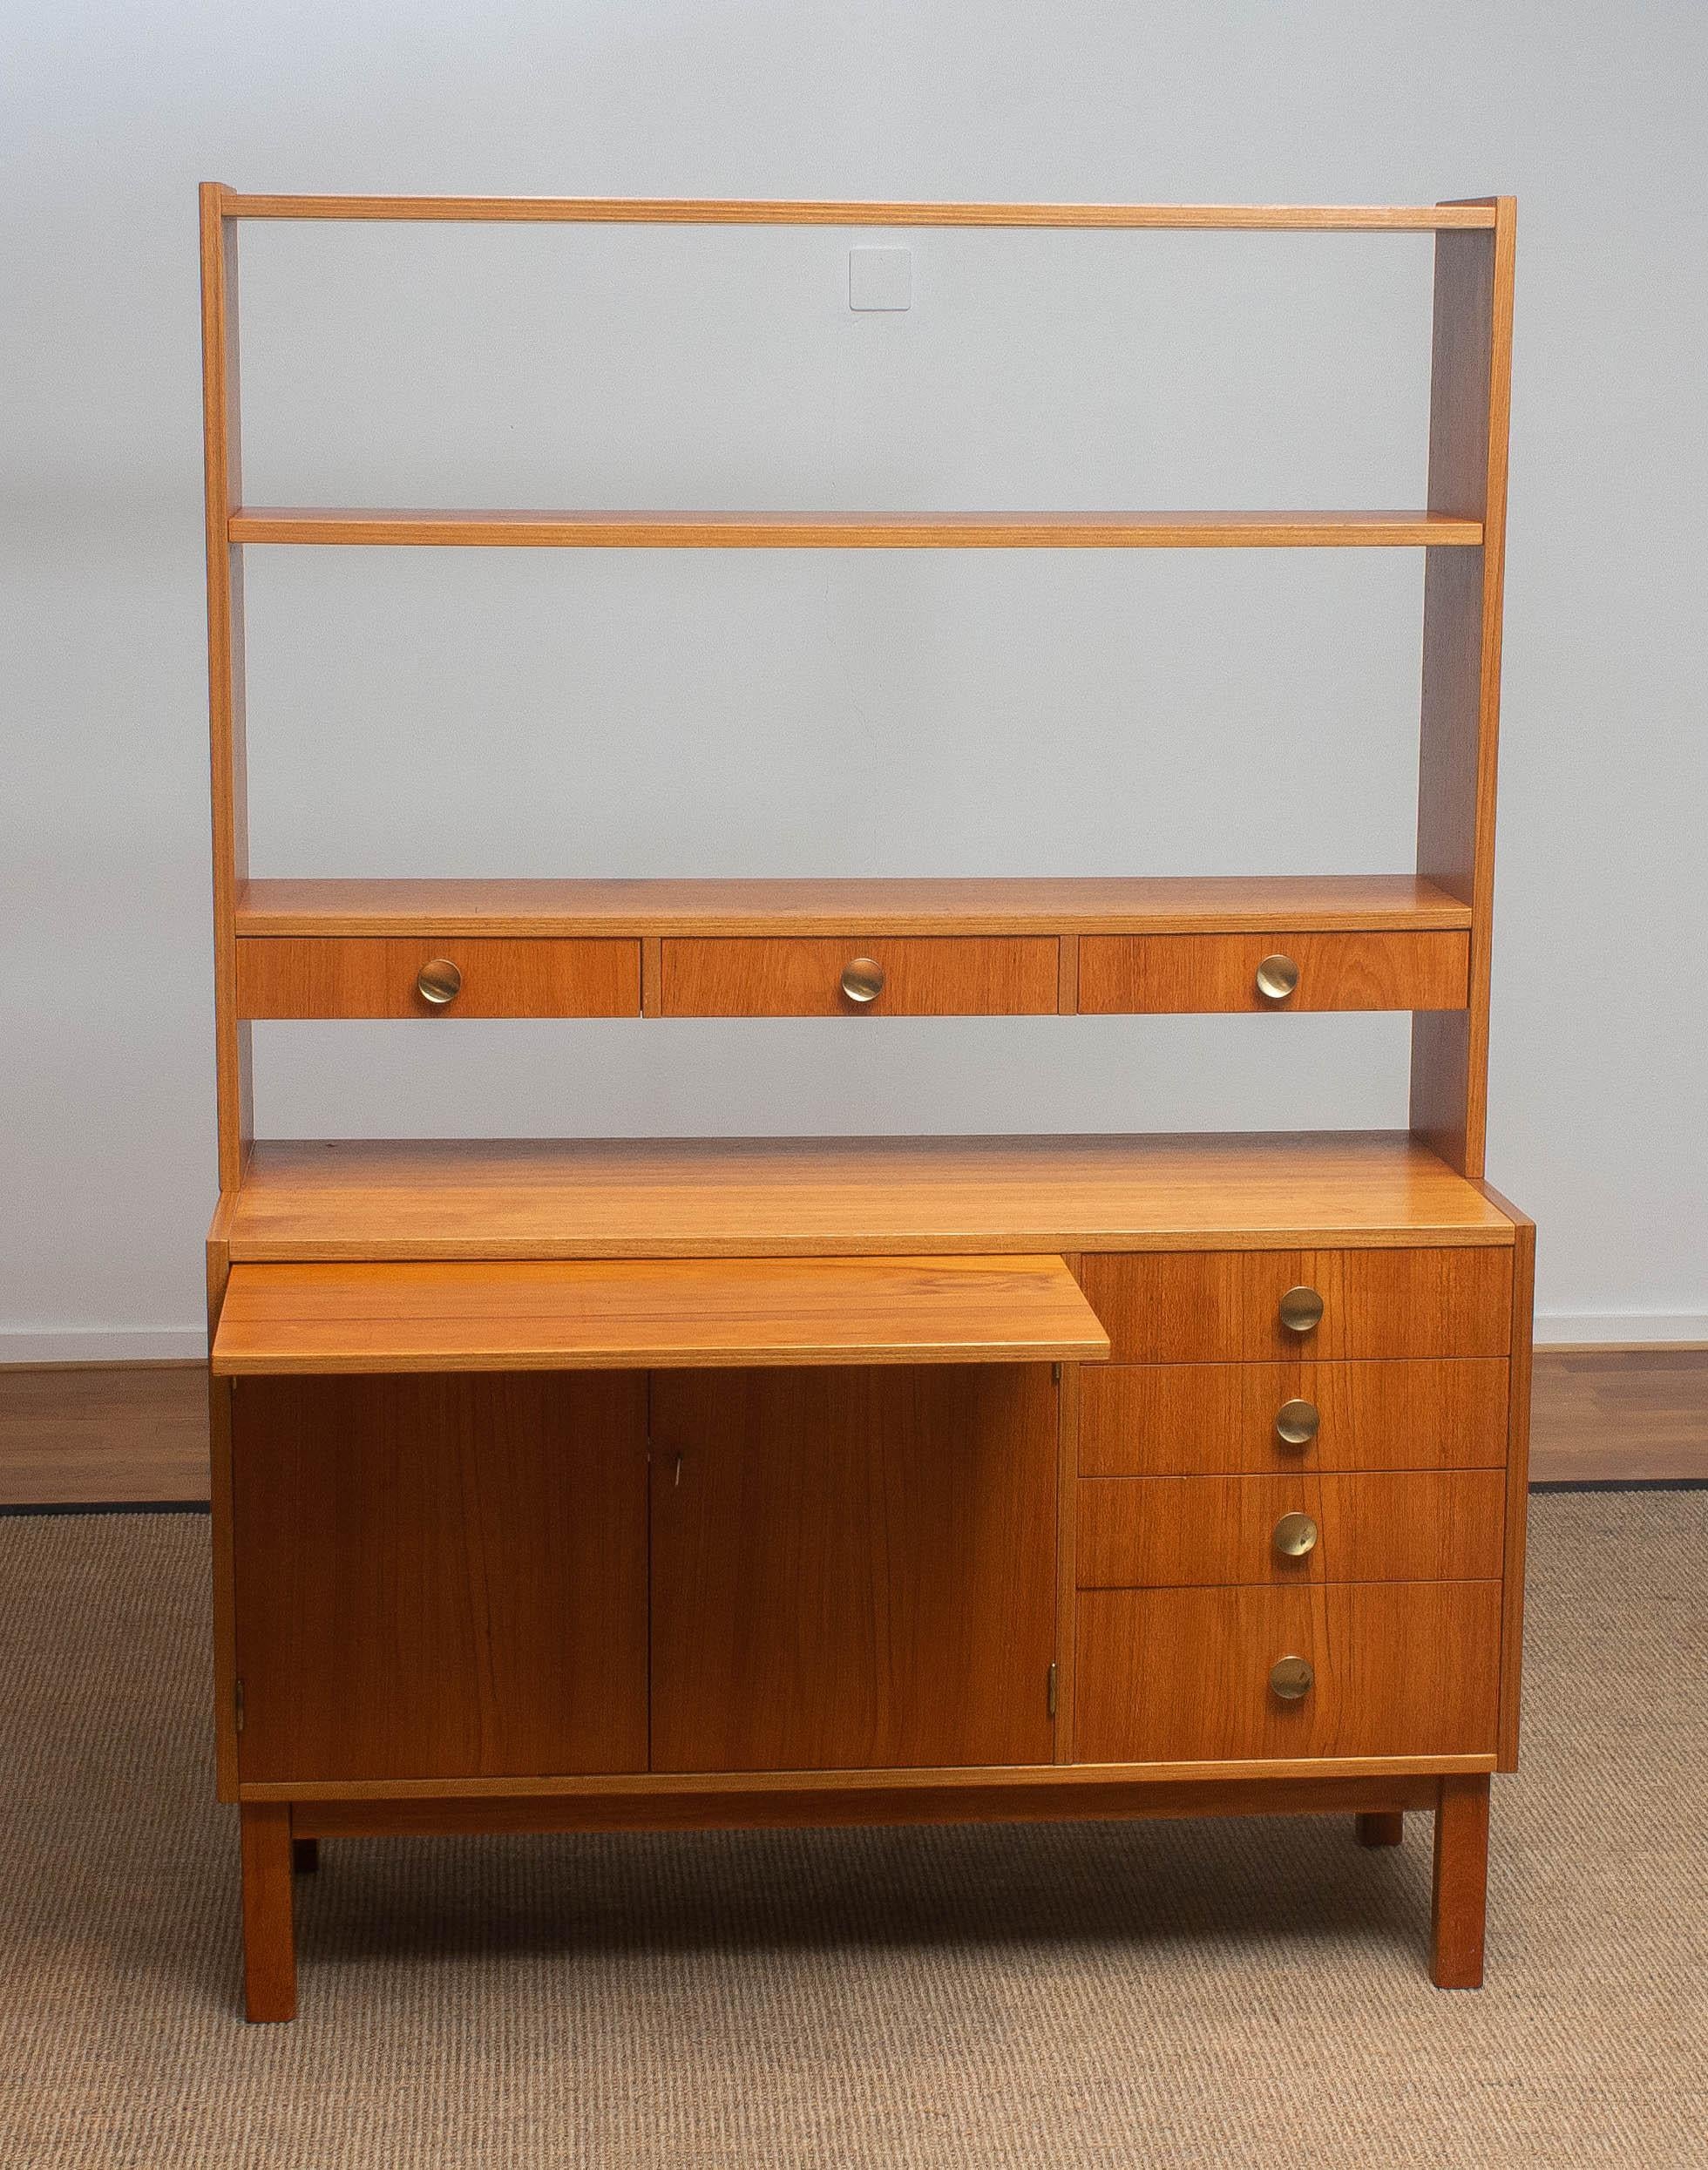 1950s Teak Veneer and Brass Bookshelves Cabinet with Writing Space from Sweden 3